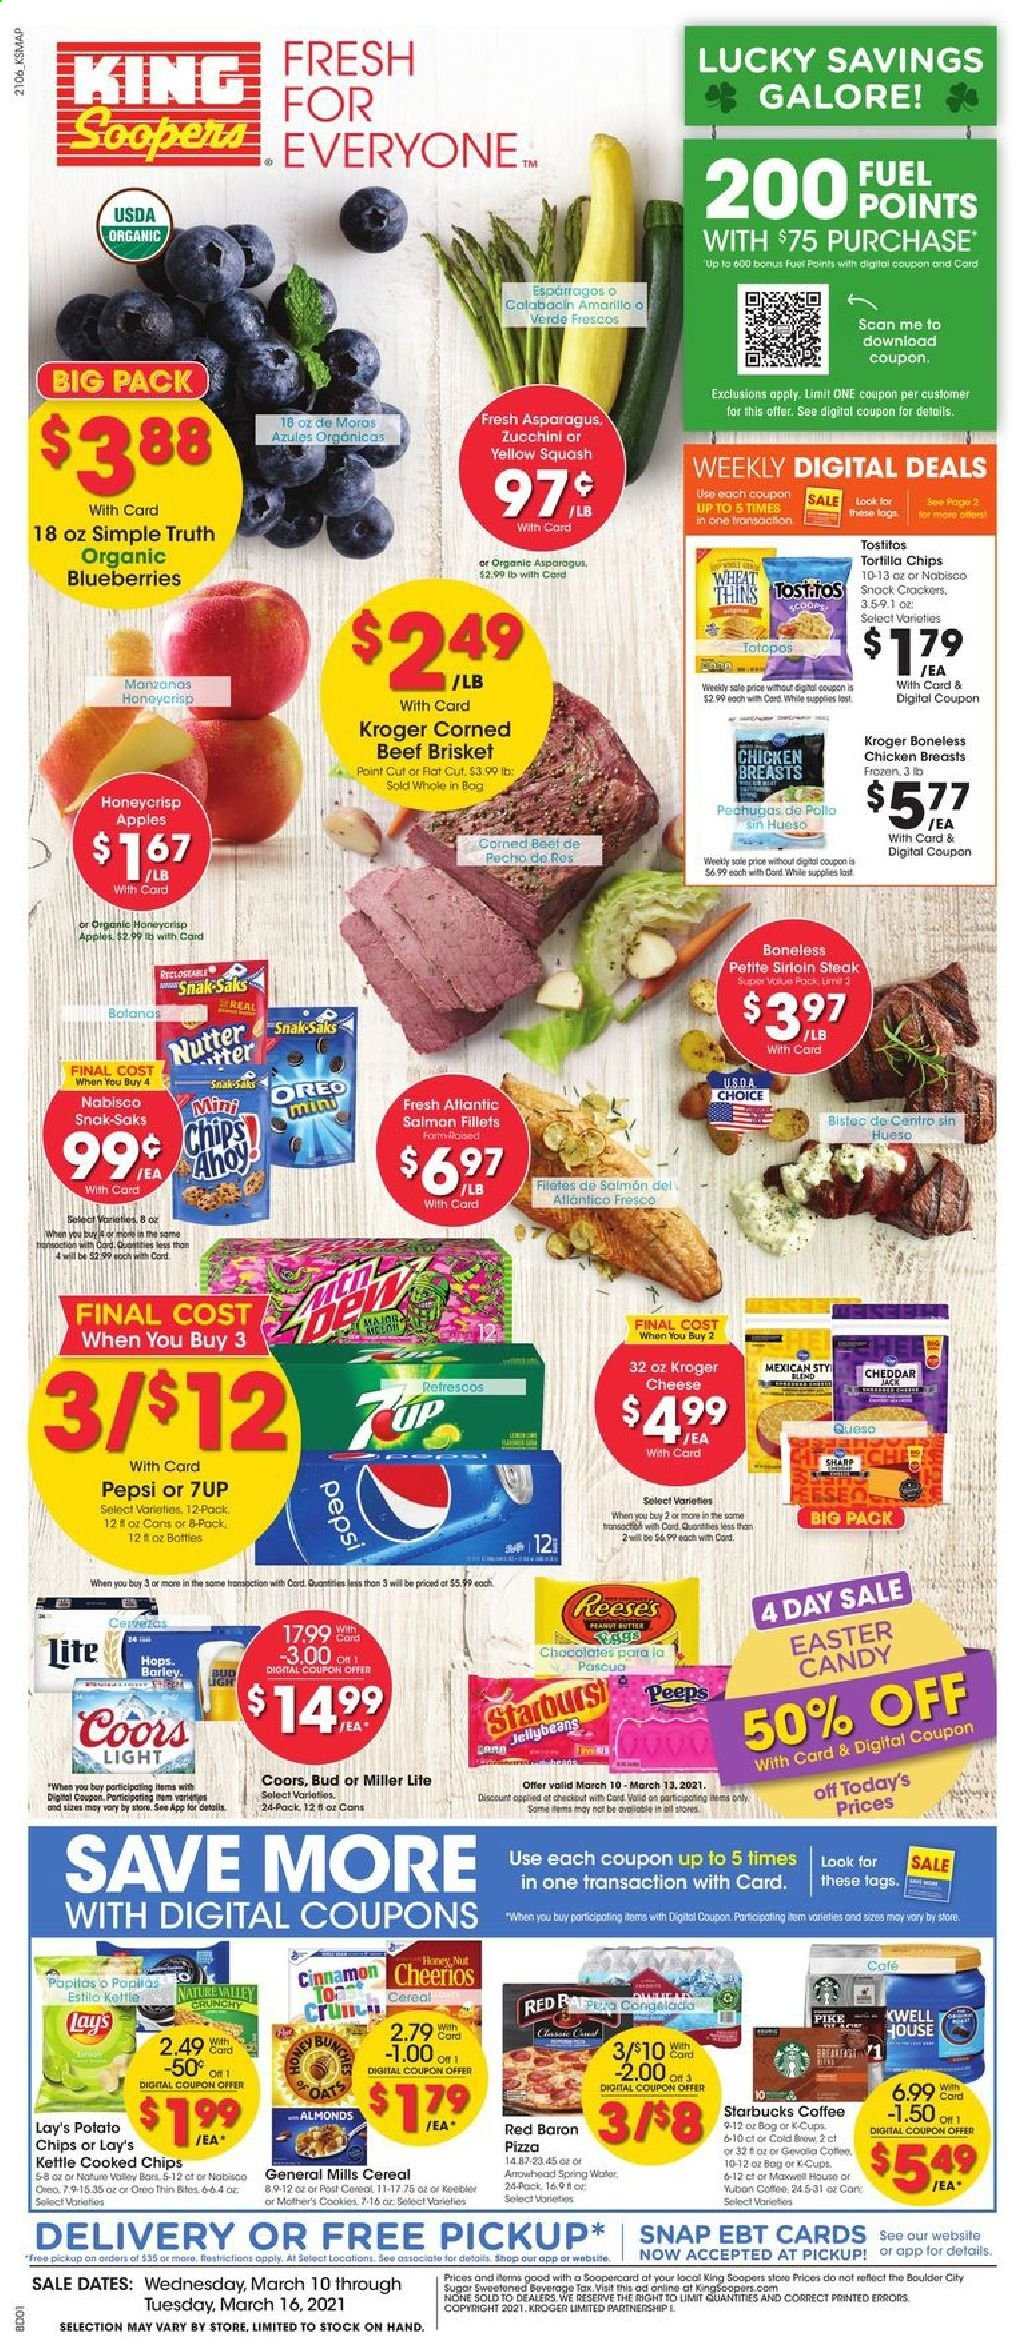 thumbnail - King Soopers Flyer - 03/10/2021 - 03/16/2021 - Sales products - blueberries, apples, northern pike, pizza, cheddar, cheese, Oreo, Reese's, zucchini, Red Baron, cookies, chocolate, Keebler, Peeps, tortilla chips, potato chips, Lay’s, Thins, Tostitos, sugar, cereals, Cheerios, Pepsi, 7UP, coffee, Starbucks, coffee capsules, L'Or, K-Cups, beer, Miller Lite, Coors, chicken breasts, beef meat, beef sirloin, corned beef, steak, sirloin steak, beef brisket, Sharp. Page 1.